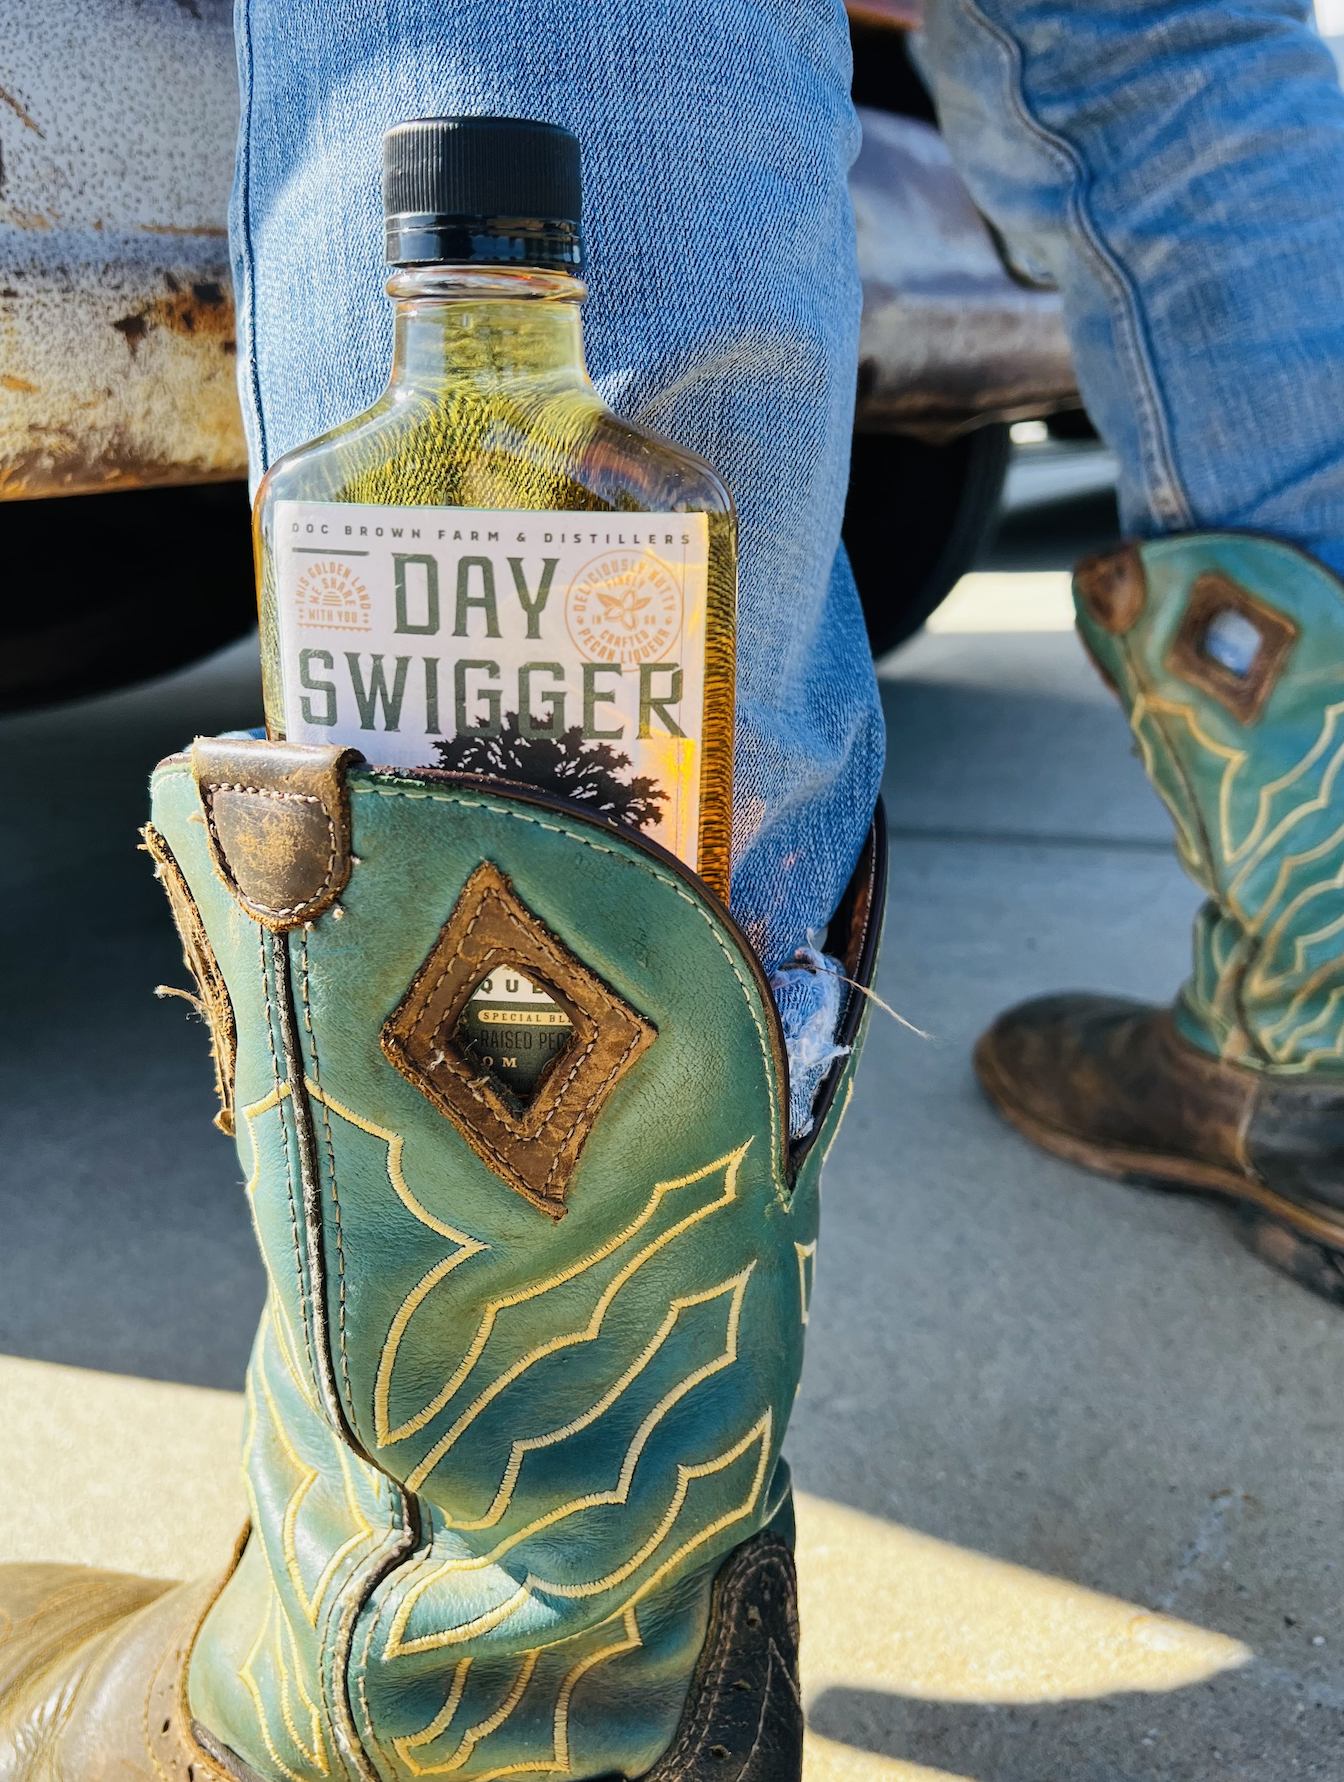 First look at Day Swigger Butter Pecan by Doc Brown Farm and Distillers